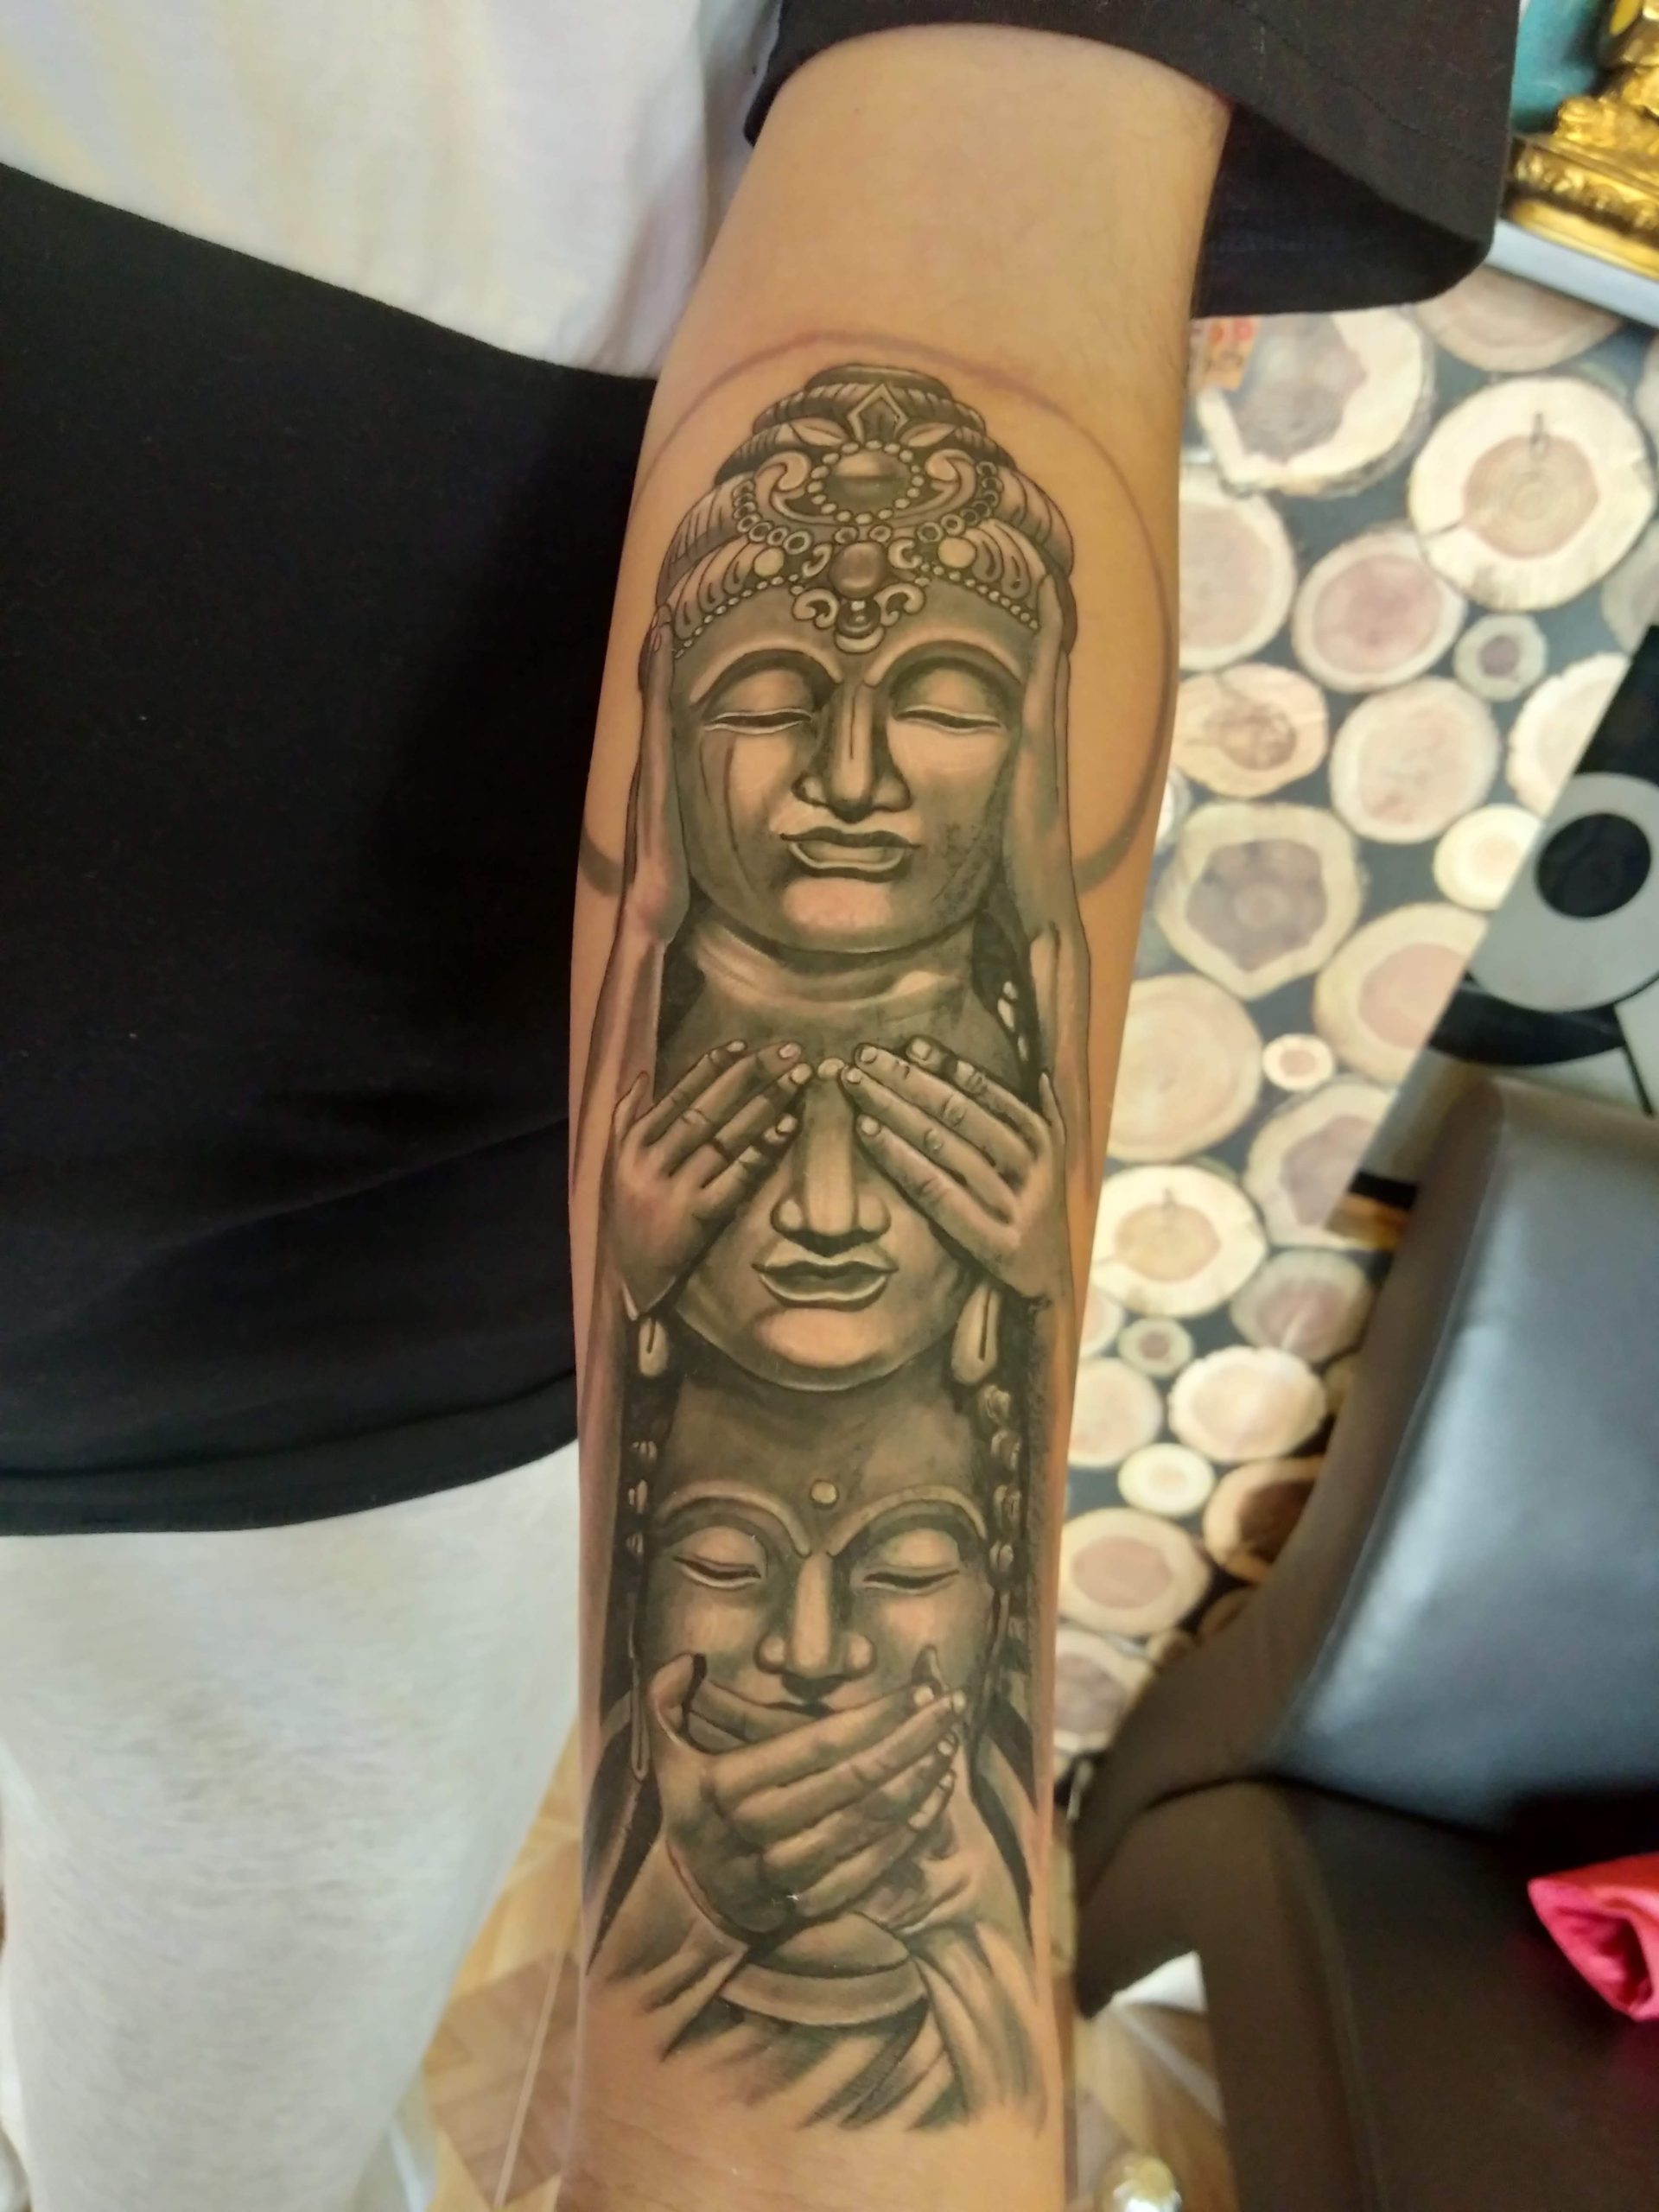 Laughing Buddha tattoo done by Ziggy at Little Bros Tattoo in CB, IA : r/ tattoos